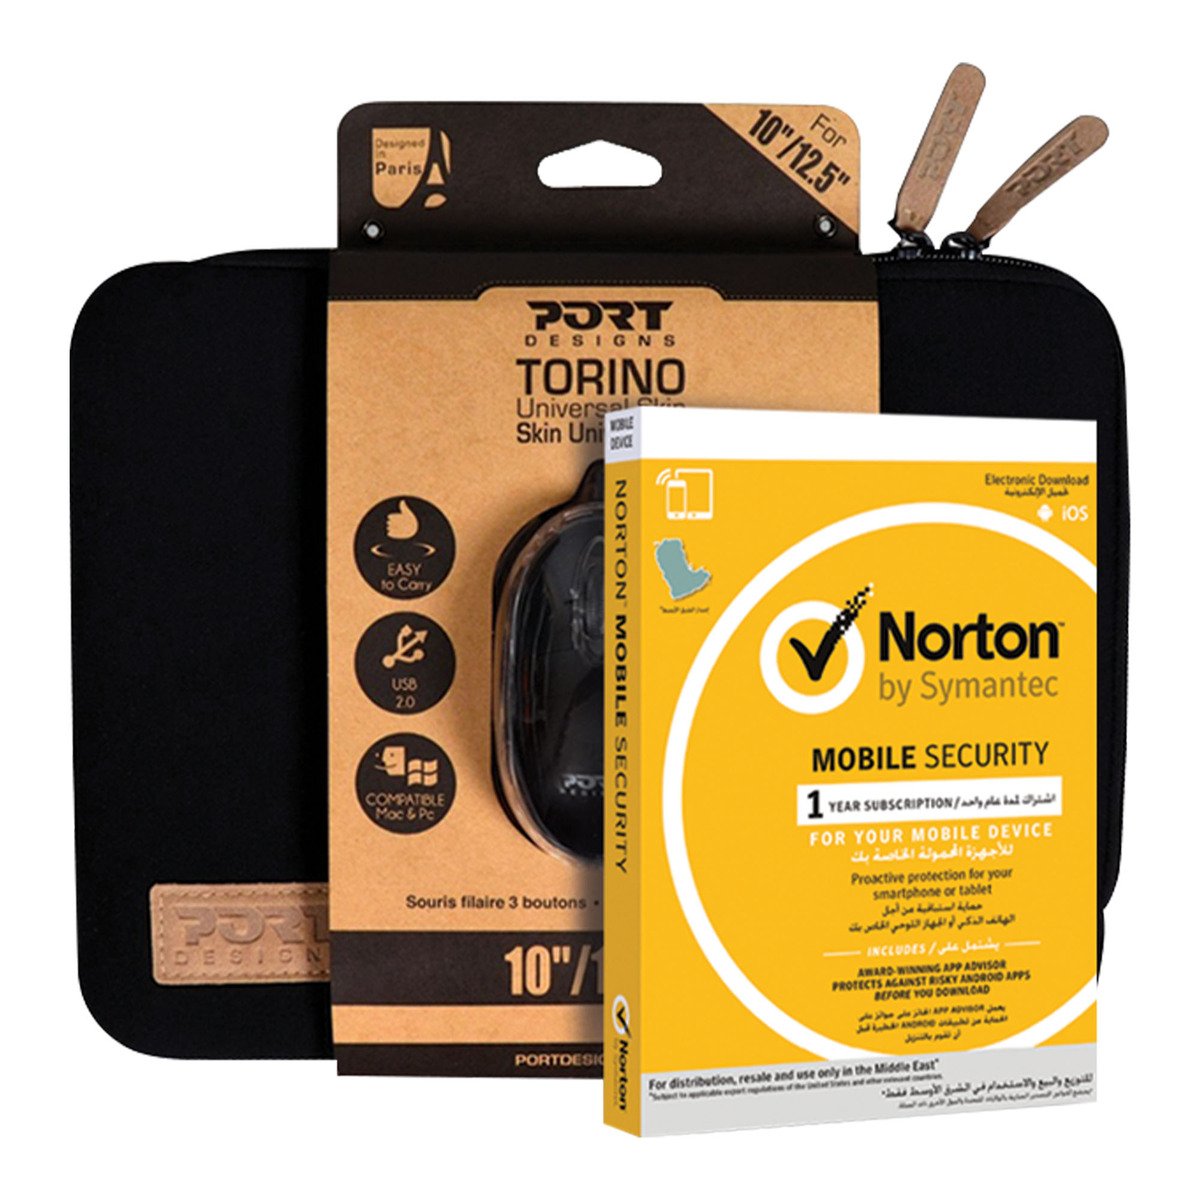 Norton Mobile Security 3.0 + Port Torino Skin Tab Case Black 12.5" + Port Wired Mouse